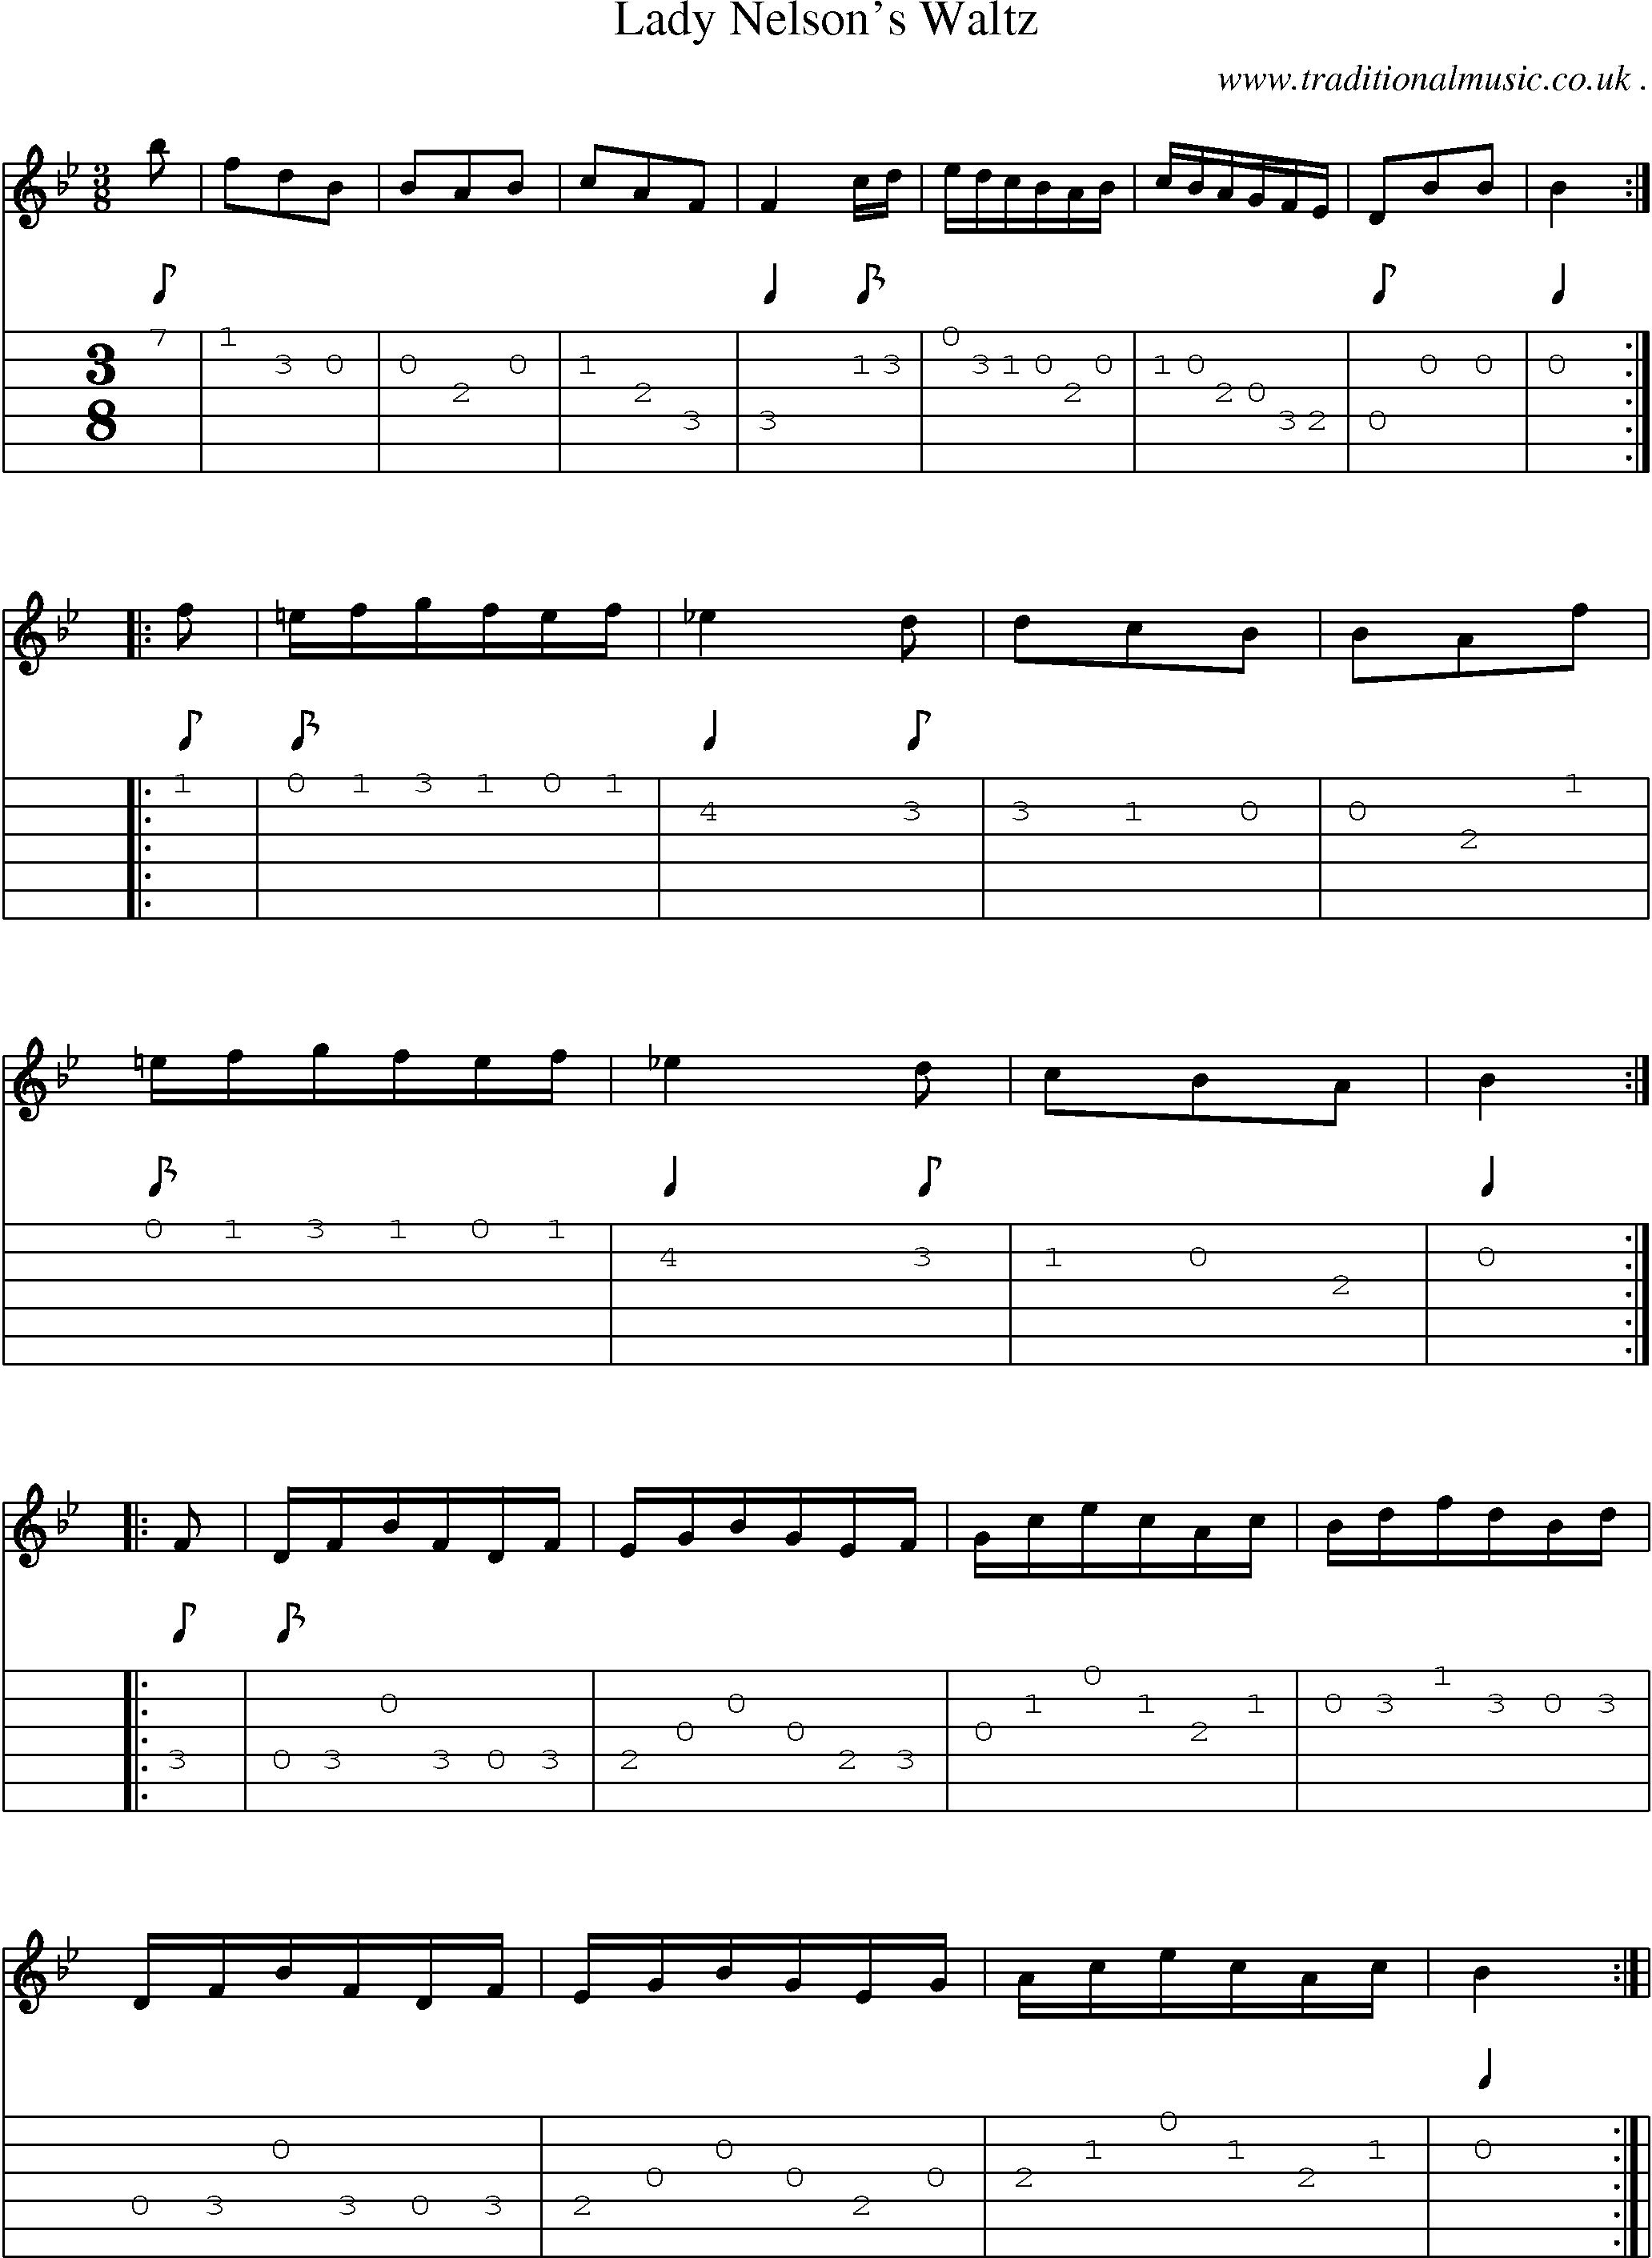 Sheet-Music and Guitar Tabs for Lady Nelsons Waltz